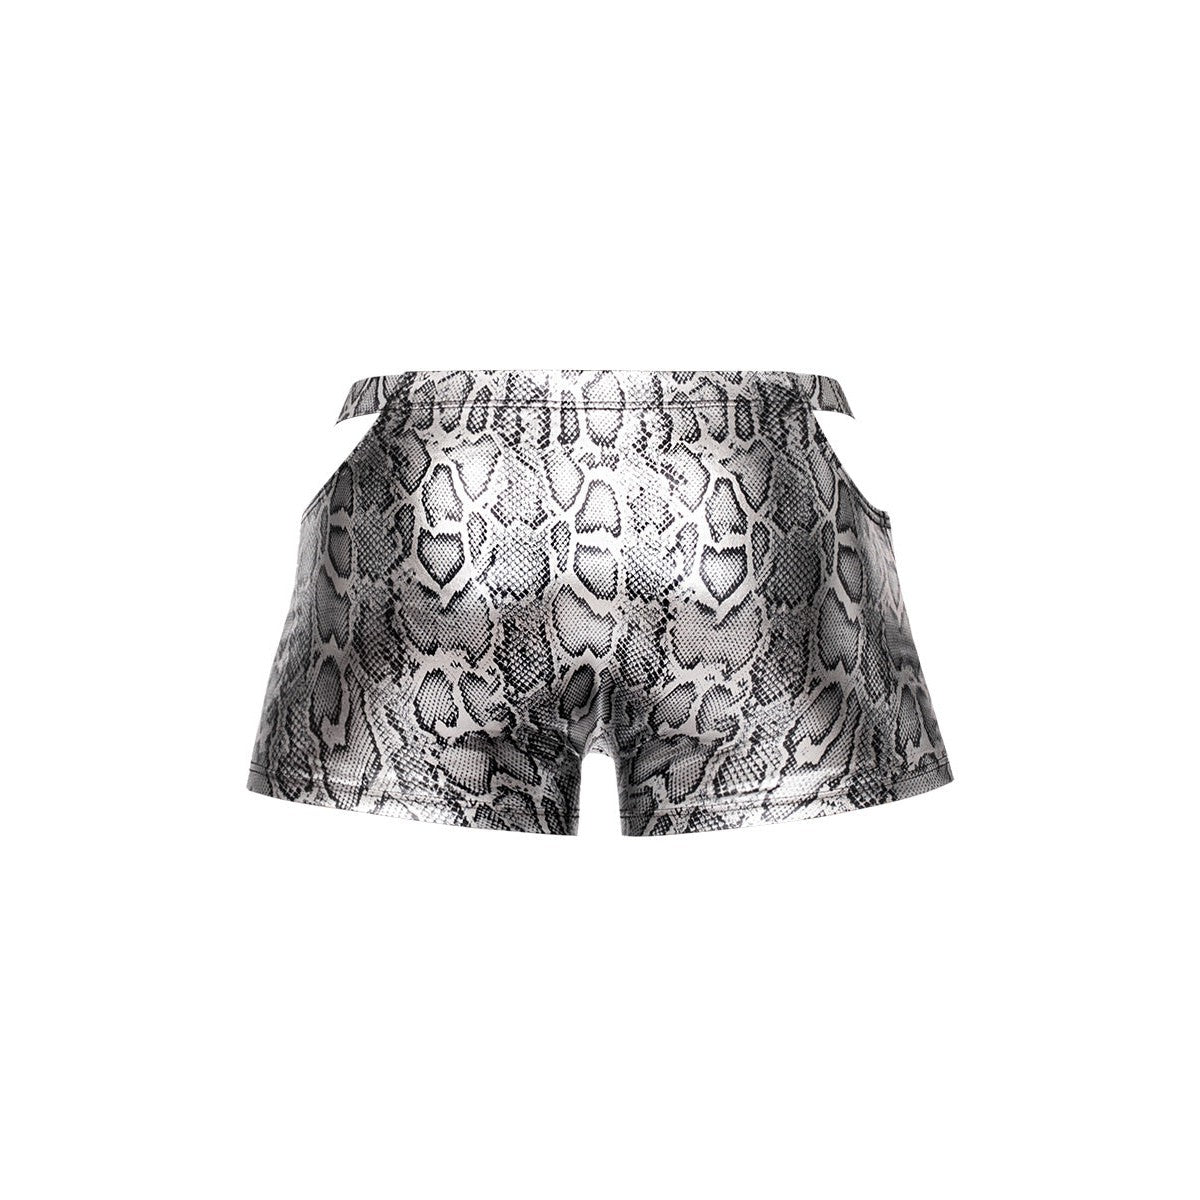 s'naked Pouch Short - X-Large - Silver/black